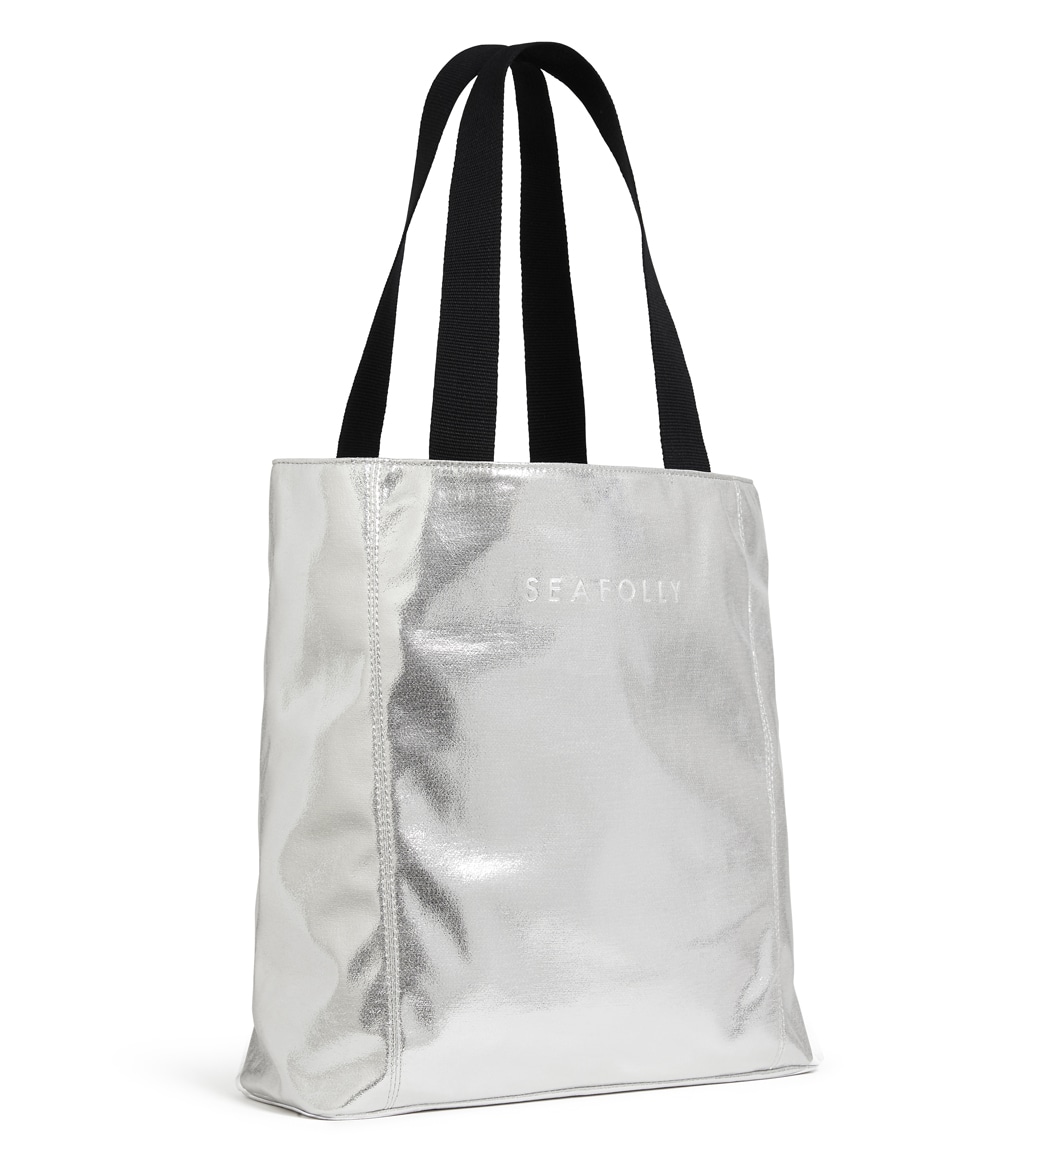 Seafolly Women's Carried Away Metallic Tote - Silver One Size - Swimoutlet.com